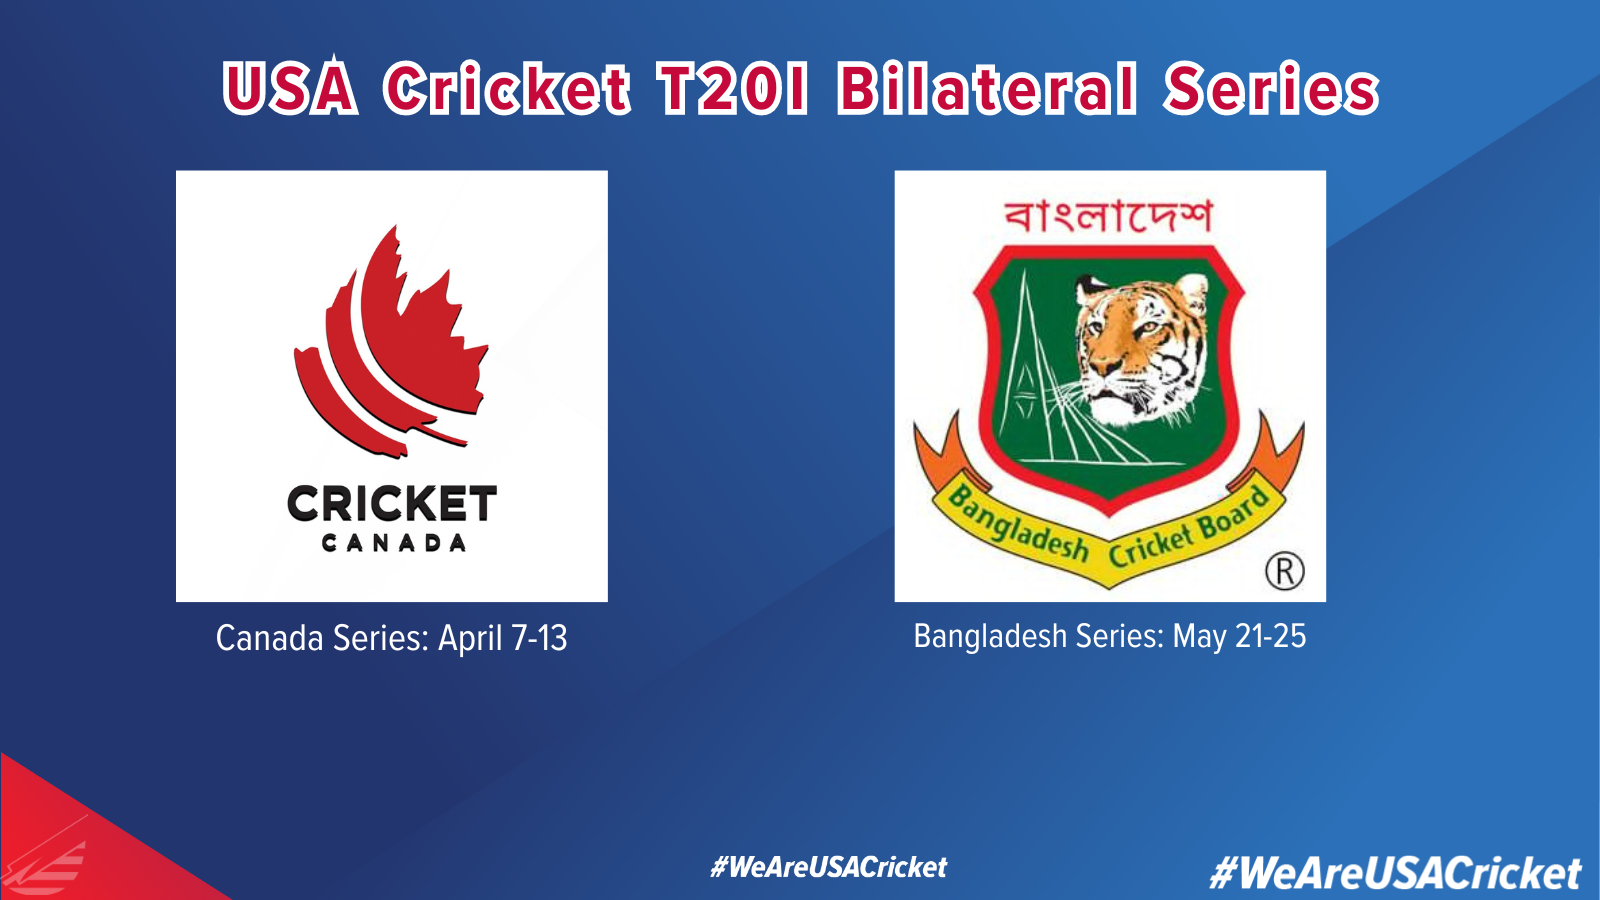 USA to host Canada & Bangladesh in crucial T20I bilateral series in April and May